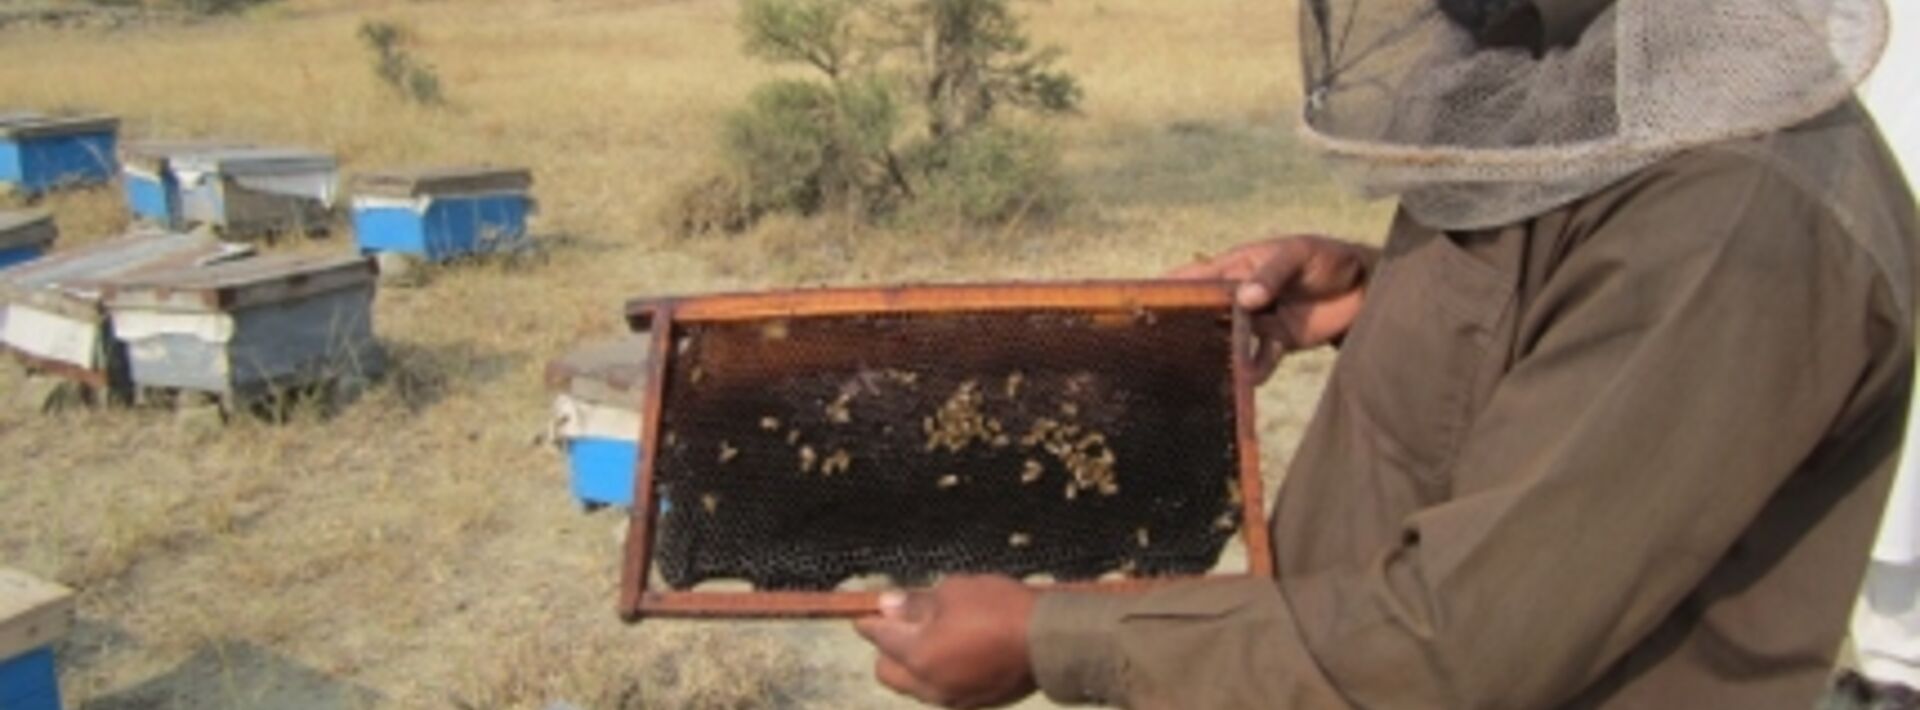 Pakistan’s farmers counter climate change with beekeeping